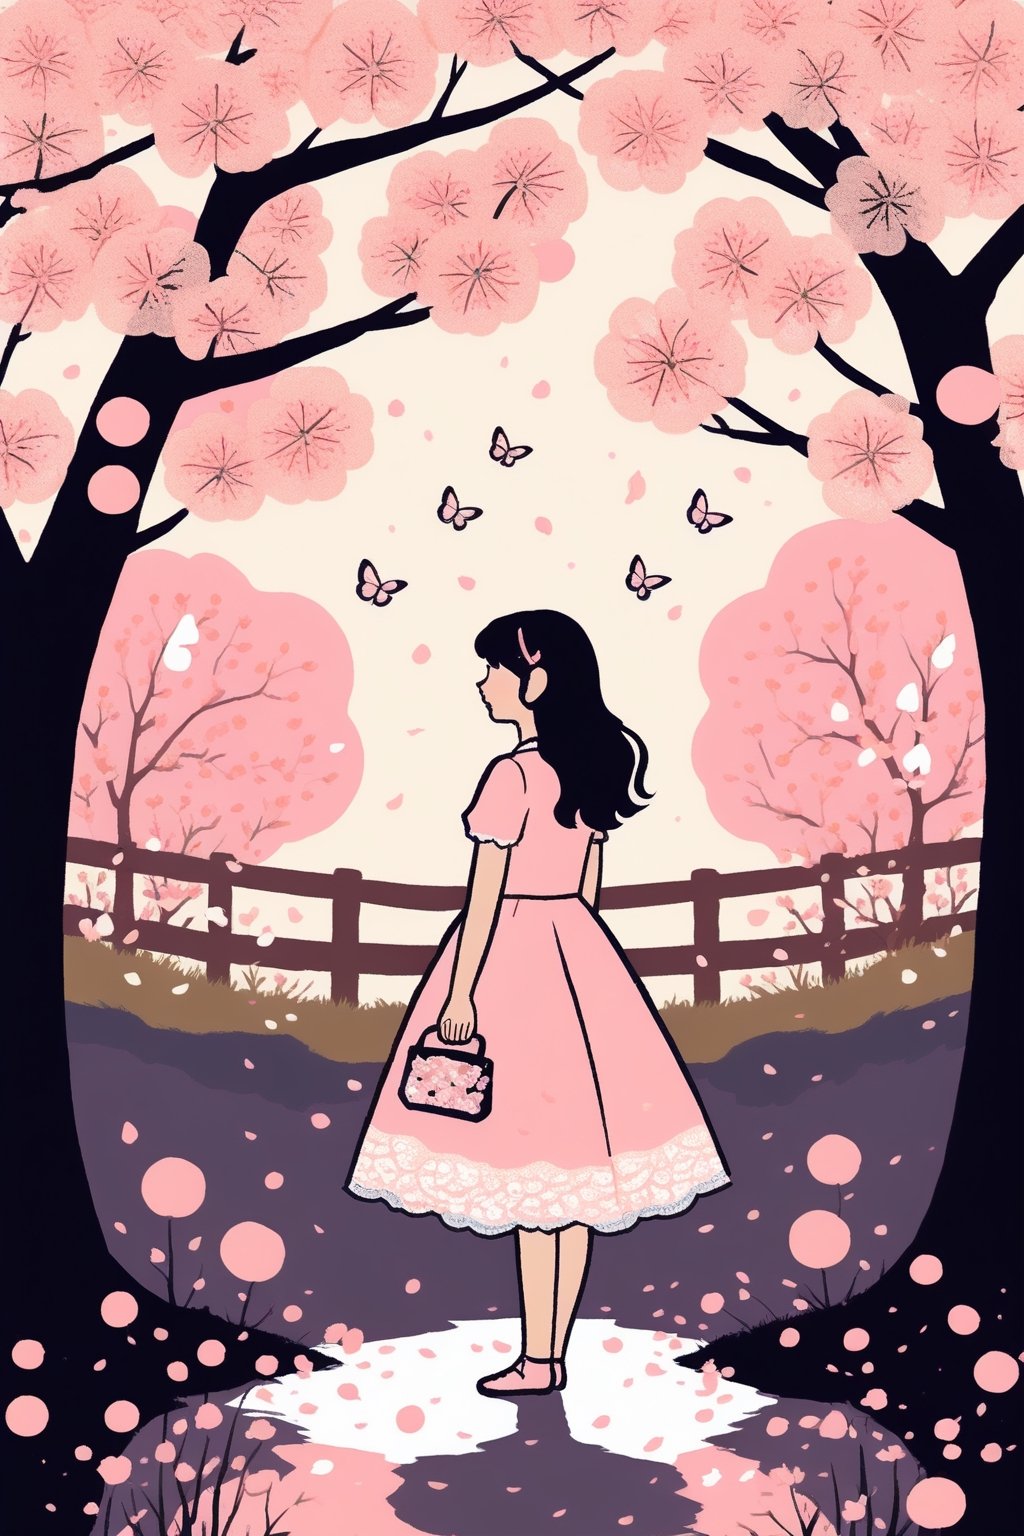 girl in lolita dress, pastel colors, intricate lace details, bow accents, in a blooming cherry blossom garden, with petals floating in the air, surrounded by whimsical fairy lights, a serene and ethereal atmosphere, painting,Graffiti Comic